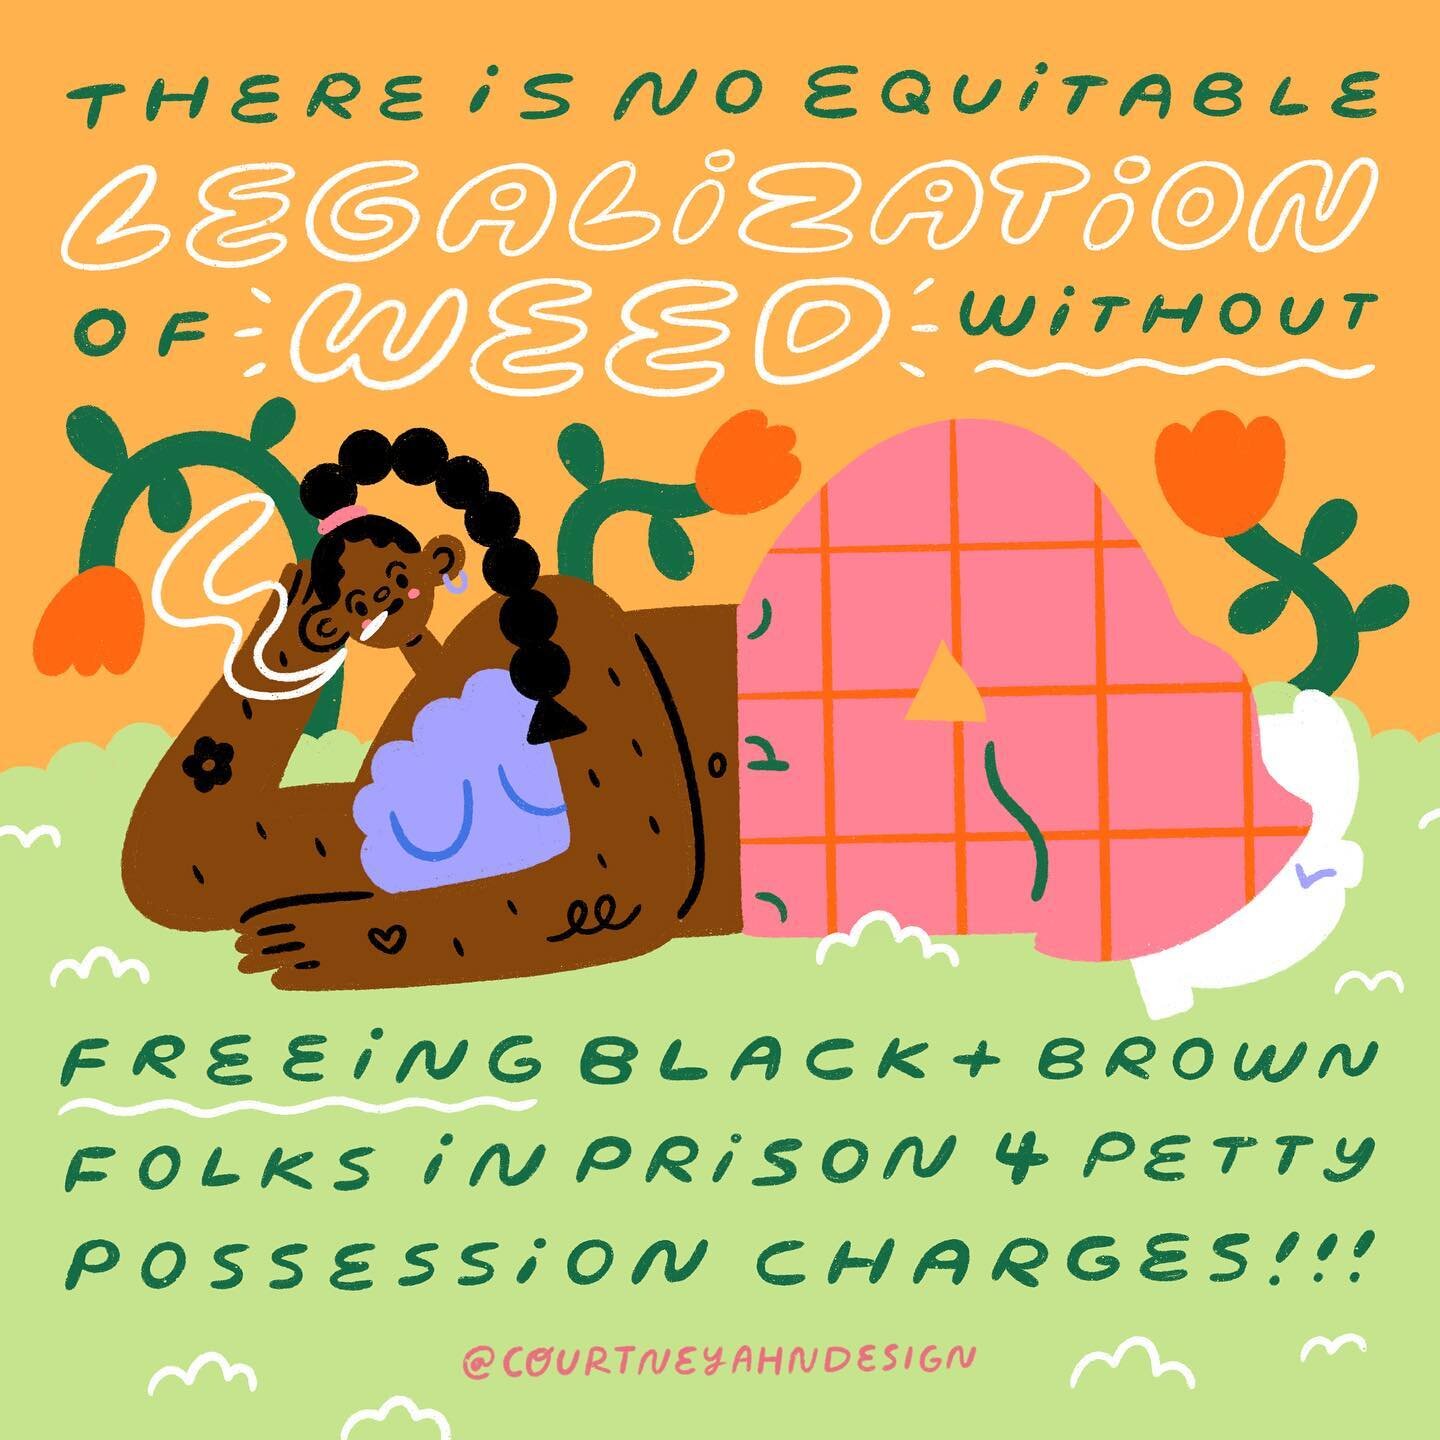 ✨no one should be in prison for weed! ✨
⠀⠀⠀⠀⠀⠀⠀⠀
There is no equitable legalization of weed without freeing Black and Brown folks rotting in prison for petty possession charges - so this 4/20, make sure you&rsquo;re fighting for both legalization and